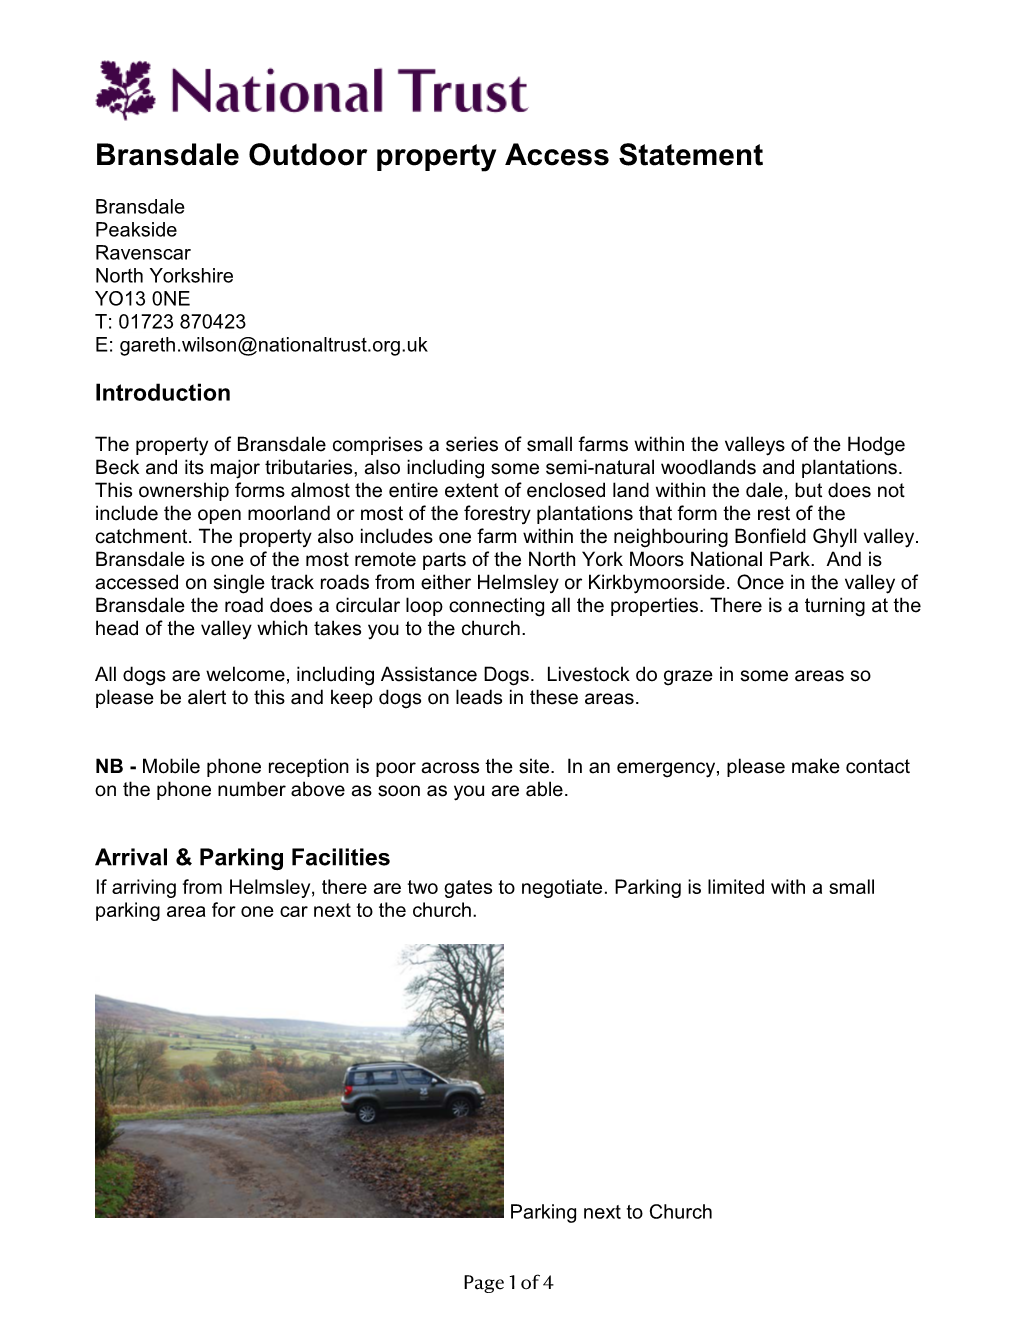 Bransdale Outdoor Property Access Statement